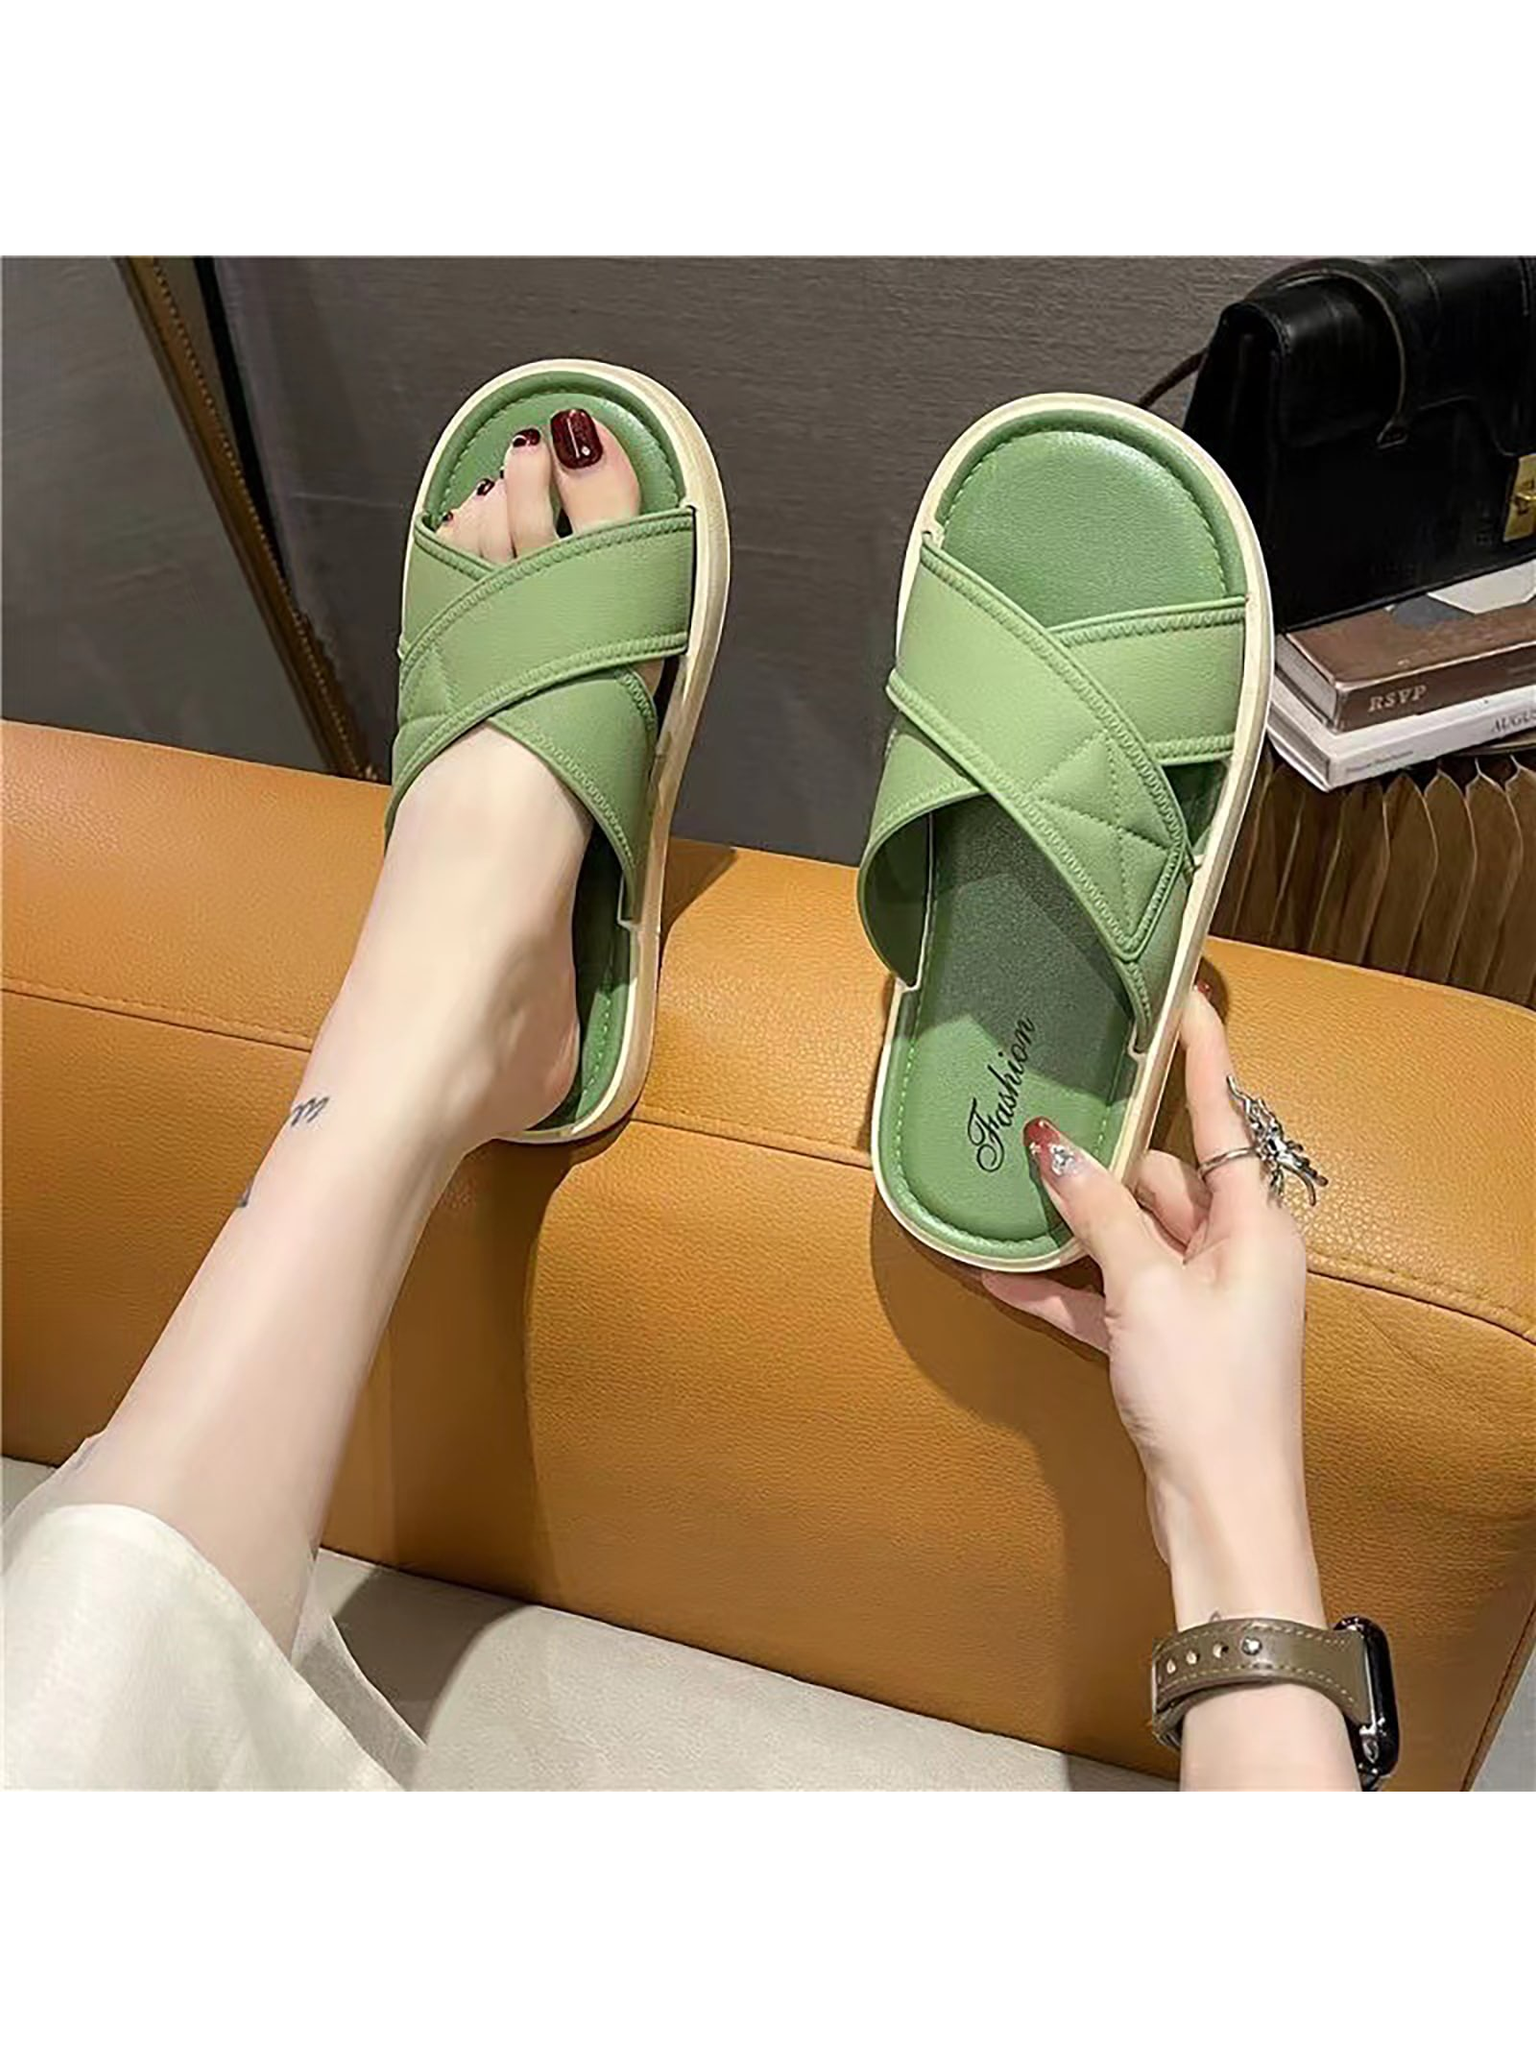 New Arrival Simple, Elegant And Versatile Slippers With Soft Pvc Outsole For Anti-Slip On The Beach And In Home Bathroom - Suitable For Indoor And Outdoor Wear, Giving You A Chic And Fresh Ins Look-Green-2